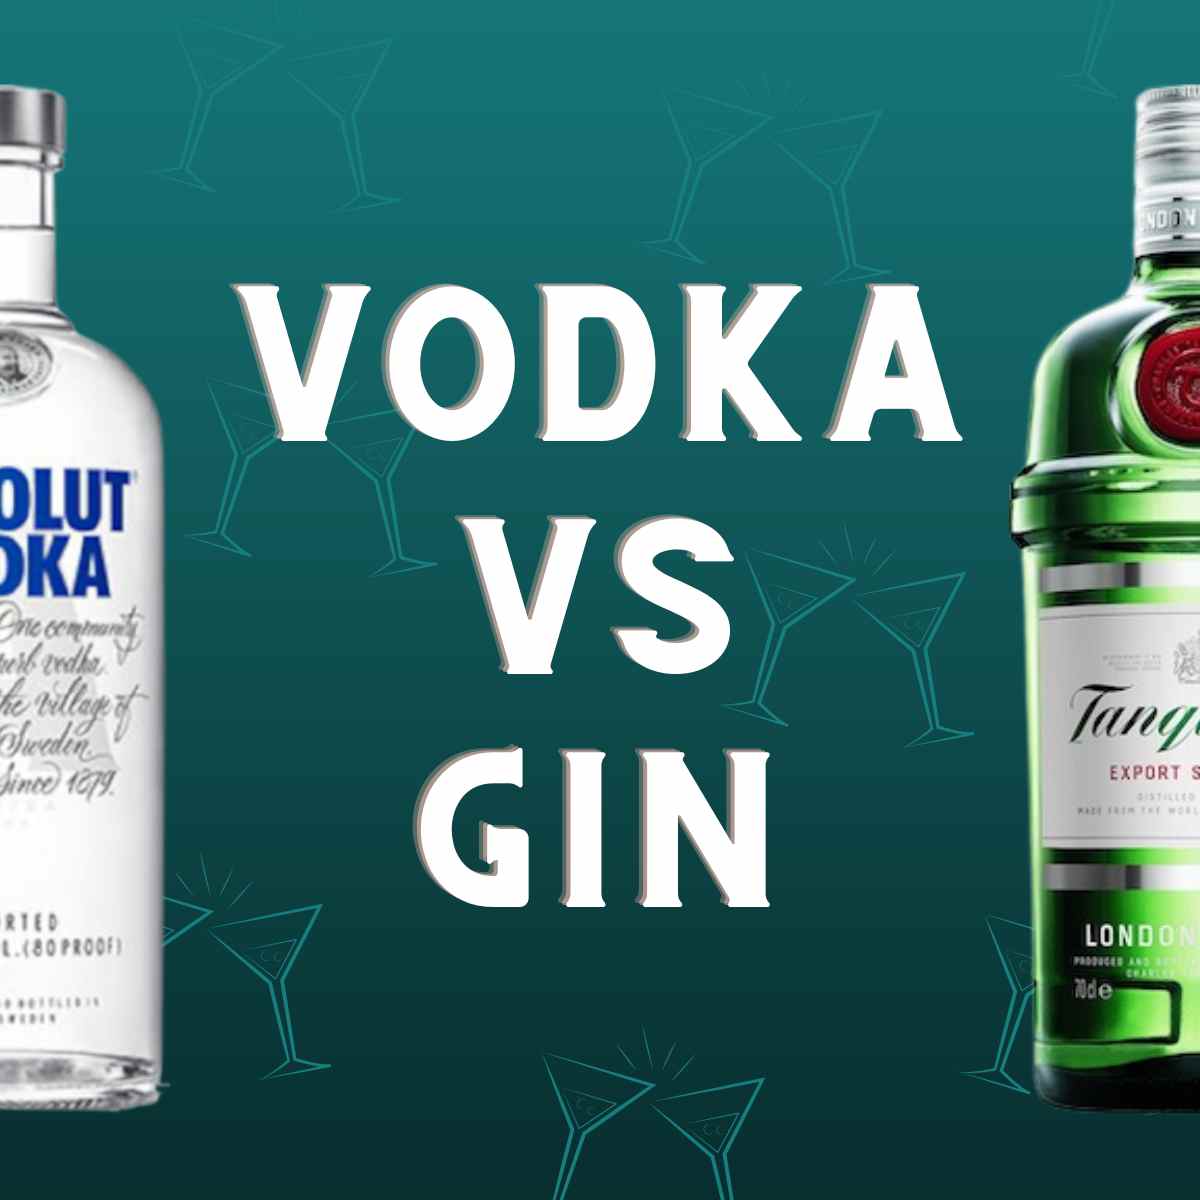 Vodka vs Gin - The differences explained